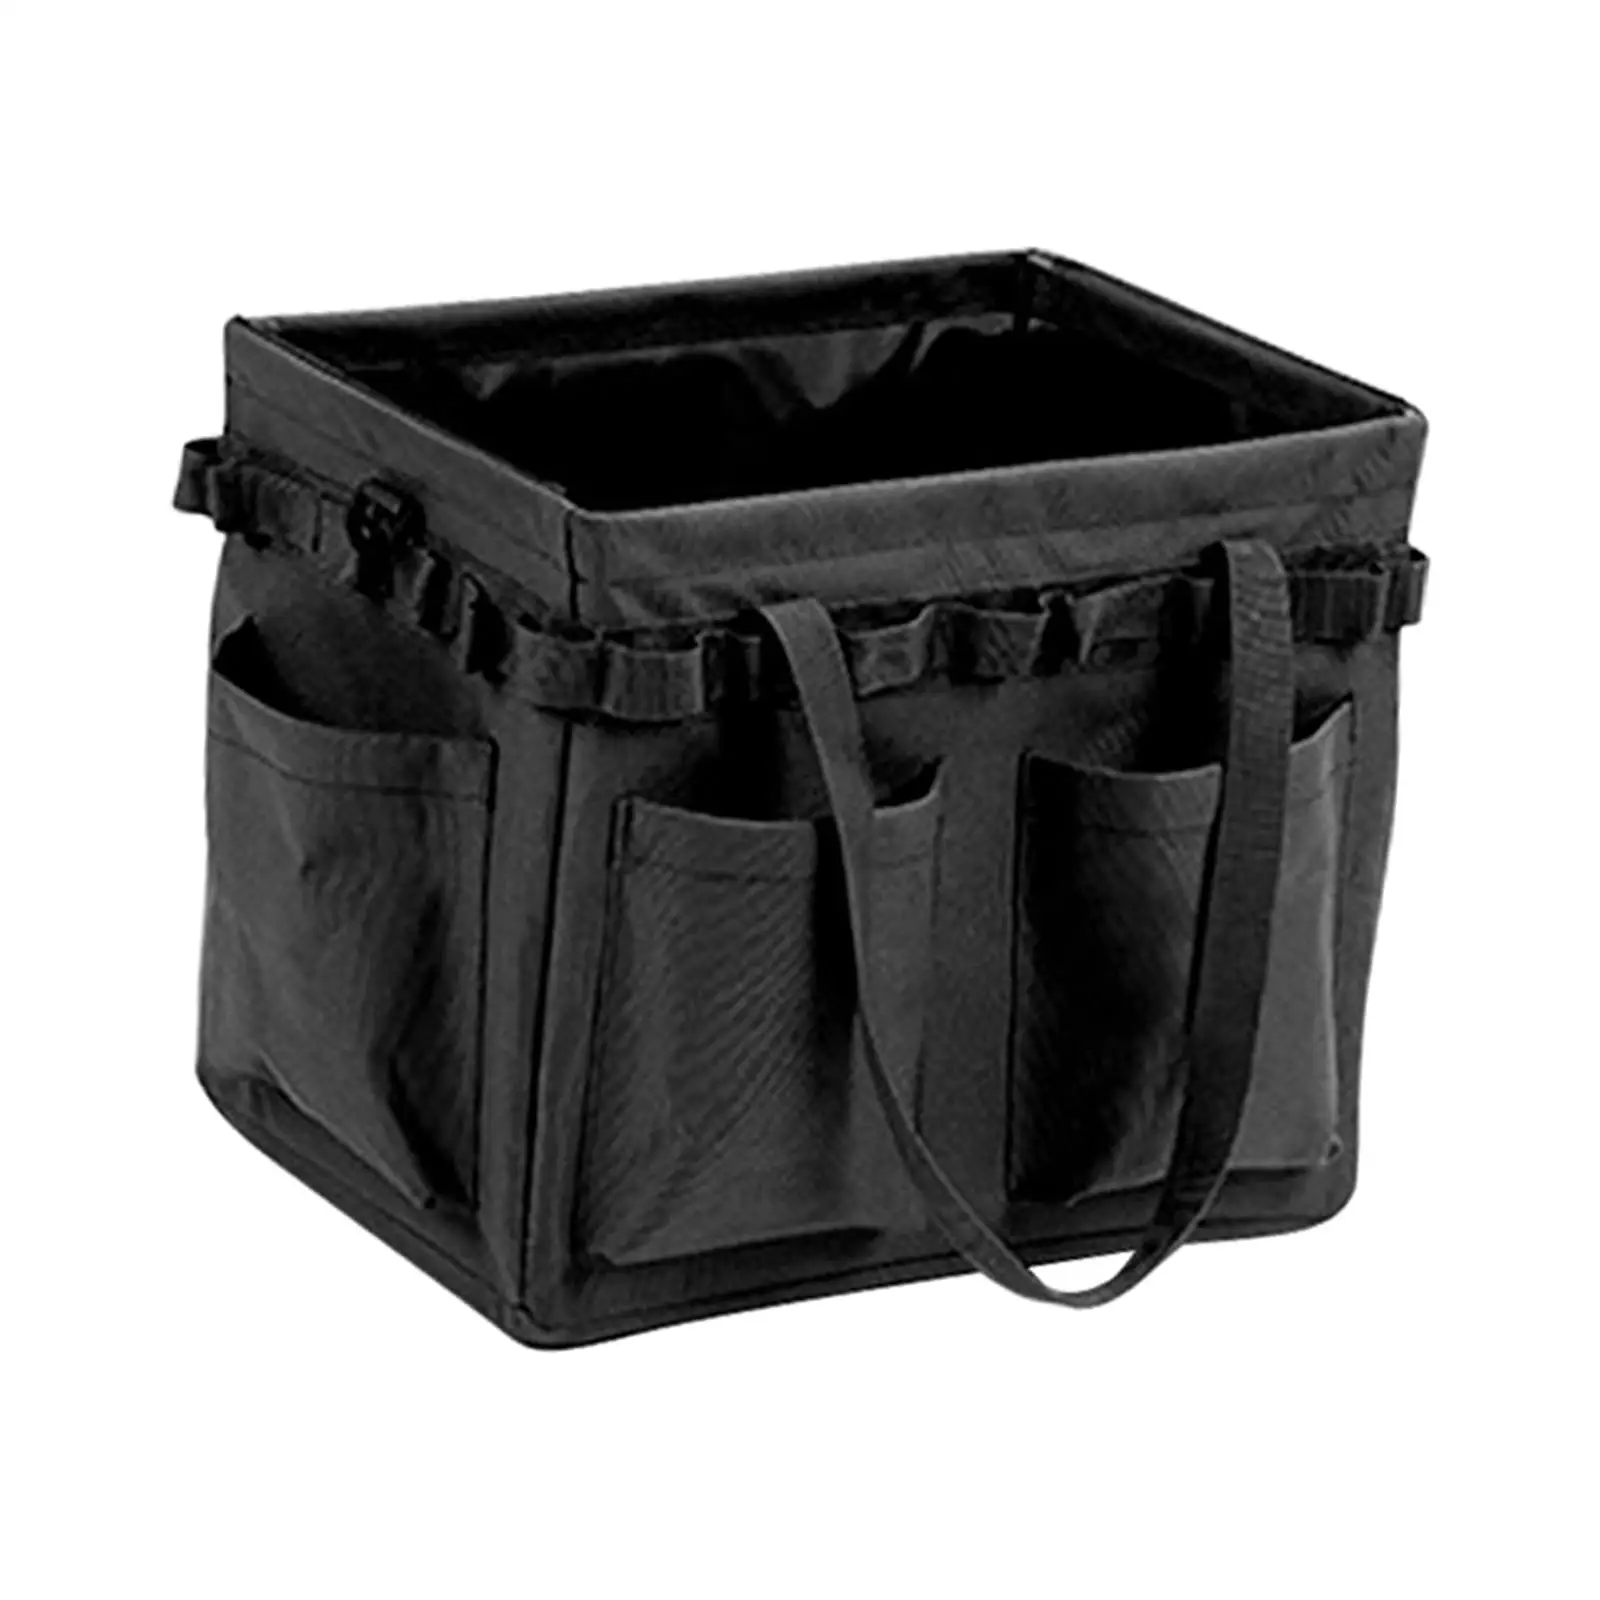 Foldable Travel Duffel Tote Utility Tote Bag Handbag Carry Basket Container Case